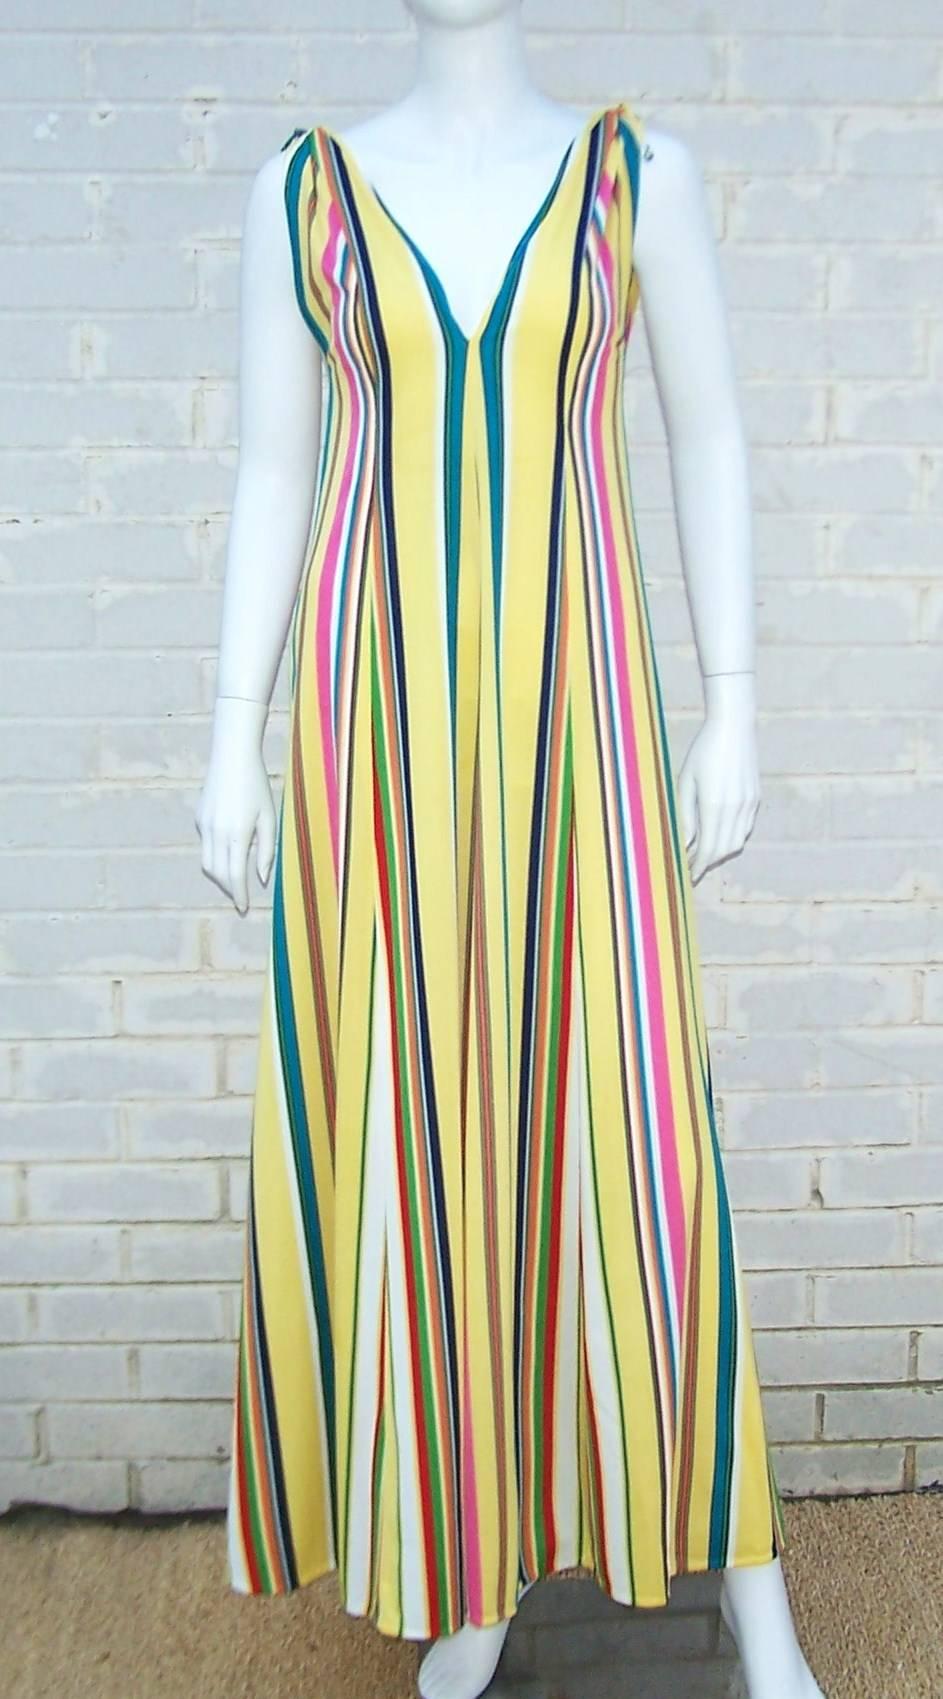 What fun!  This 1970's design by Clovis Ruffin for Keyloun is perfect for poolside, lounging or hostess wear.  The vibrant stripes and modified empire waist are a flattering combination.  The fullness of the skirt and weight of the jersey give